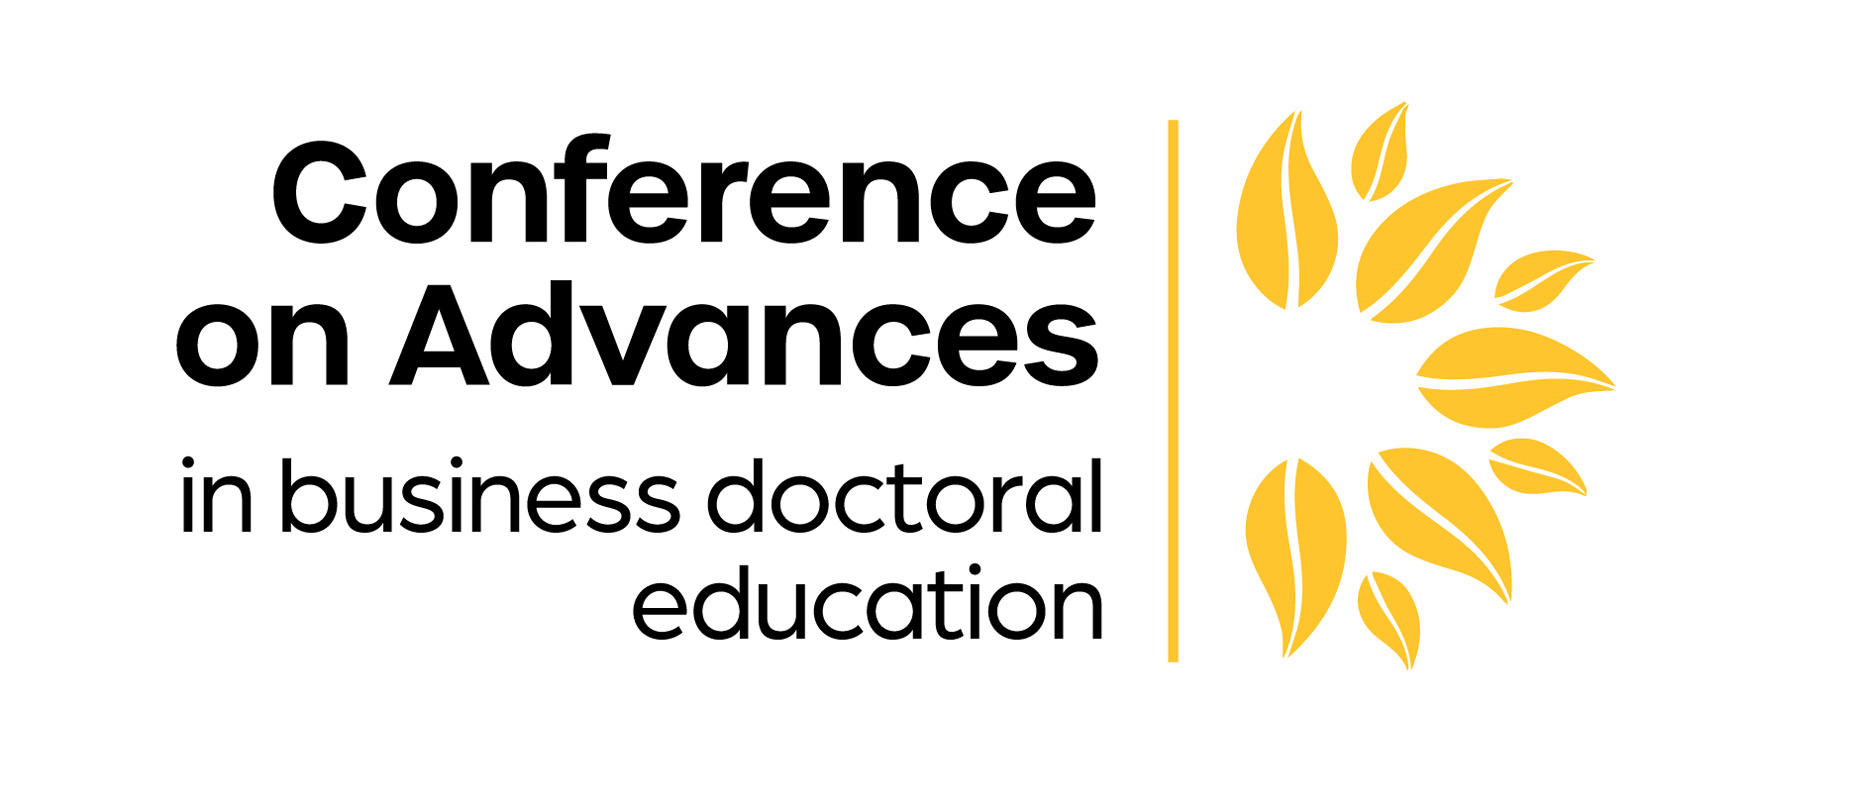 Conference on Advances in Business Doctoral Education Logo